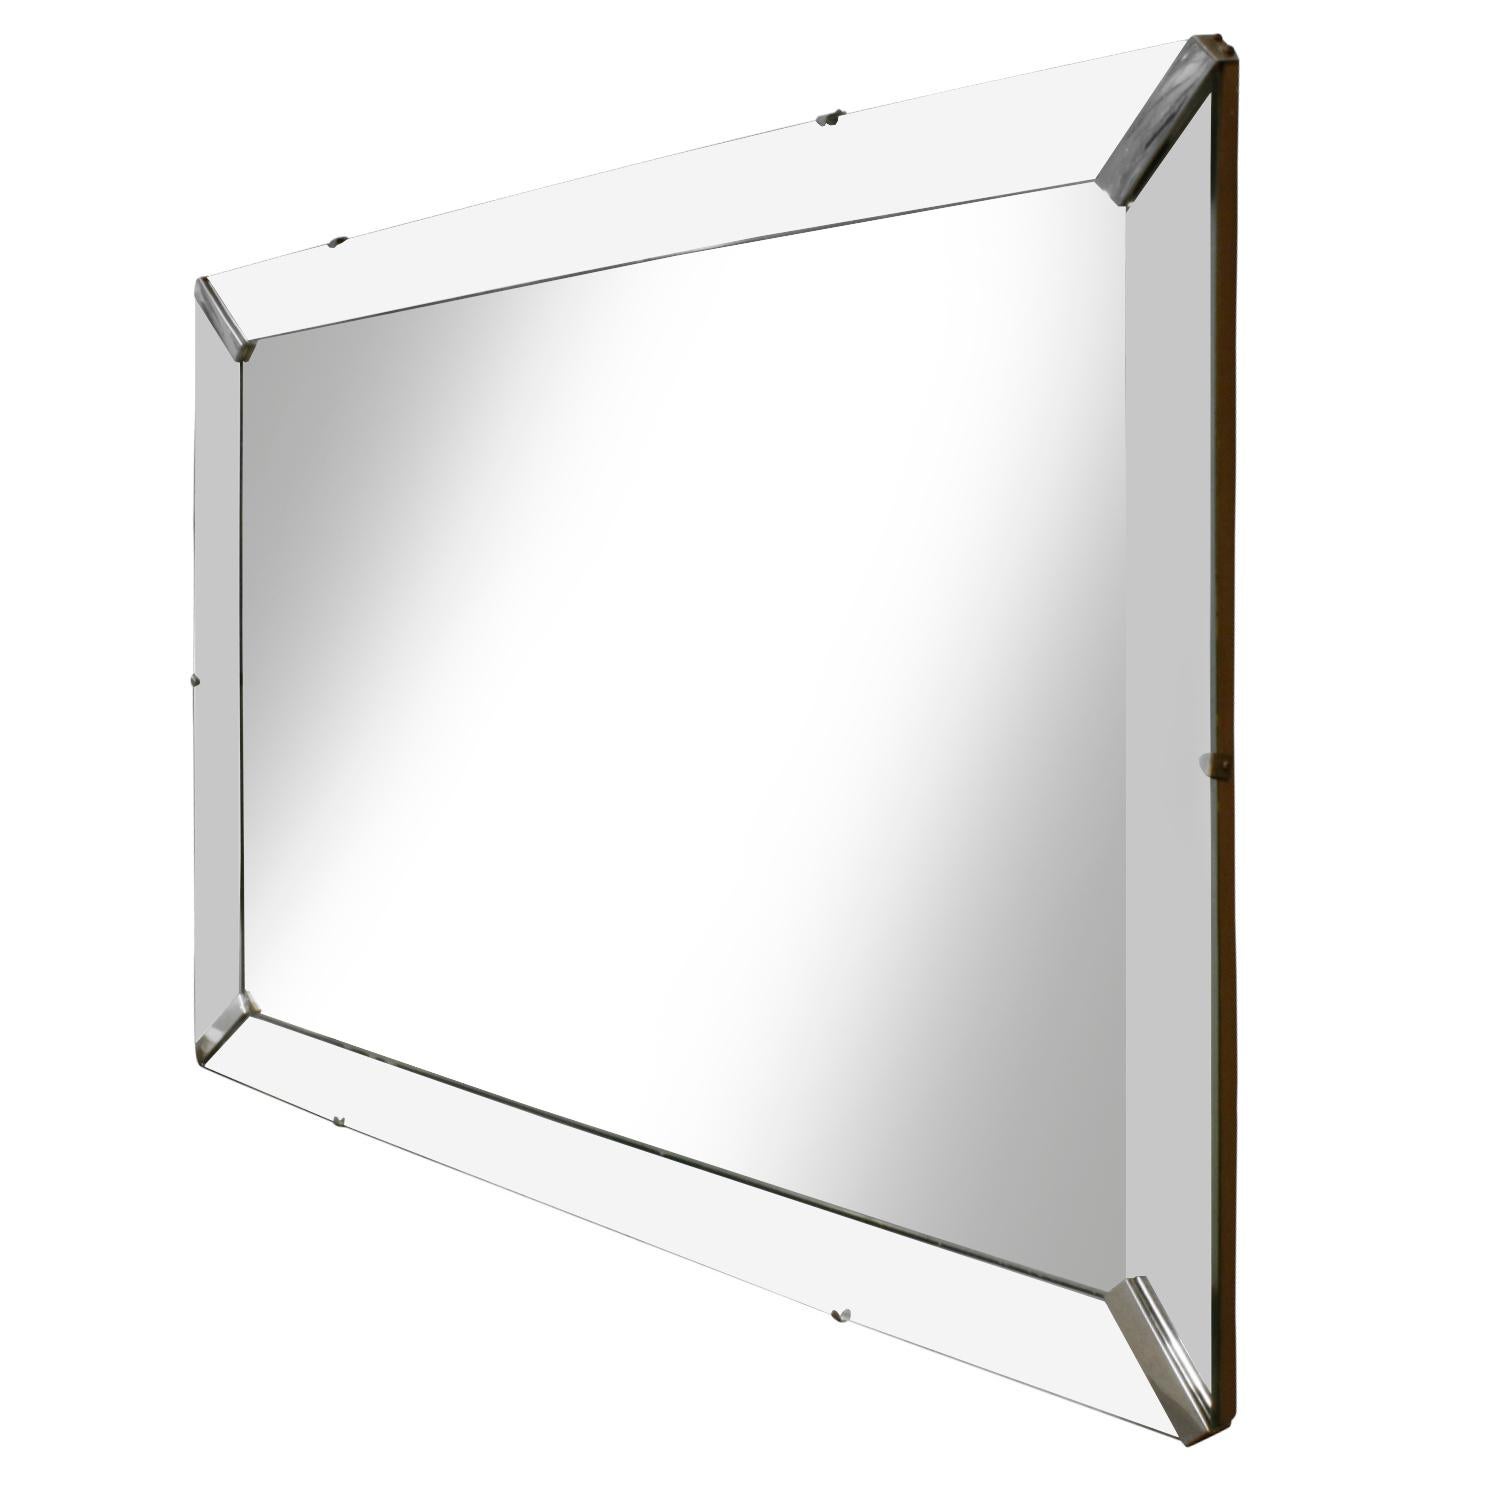 Wall hanging mirror, rectangular with chrome accents in corners, American, 1940s.